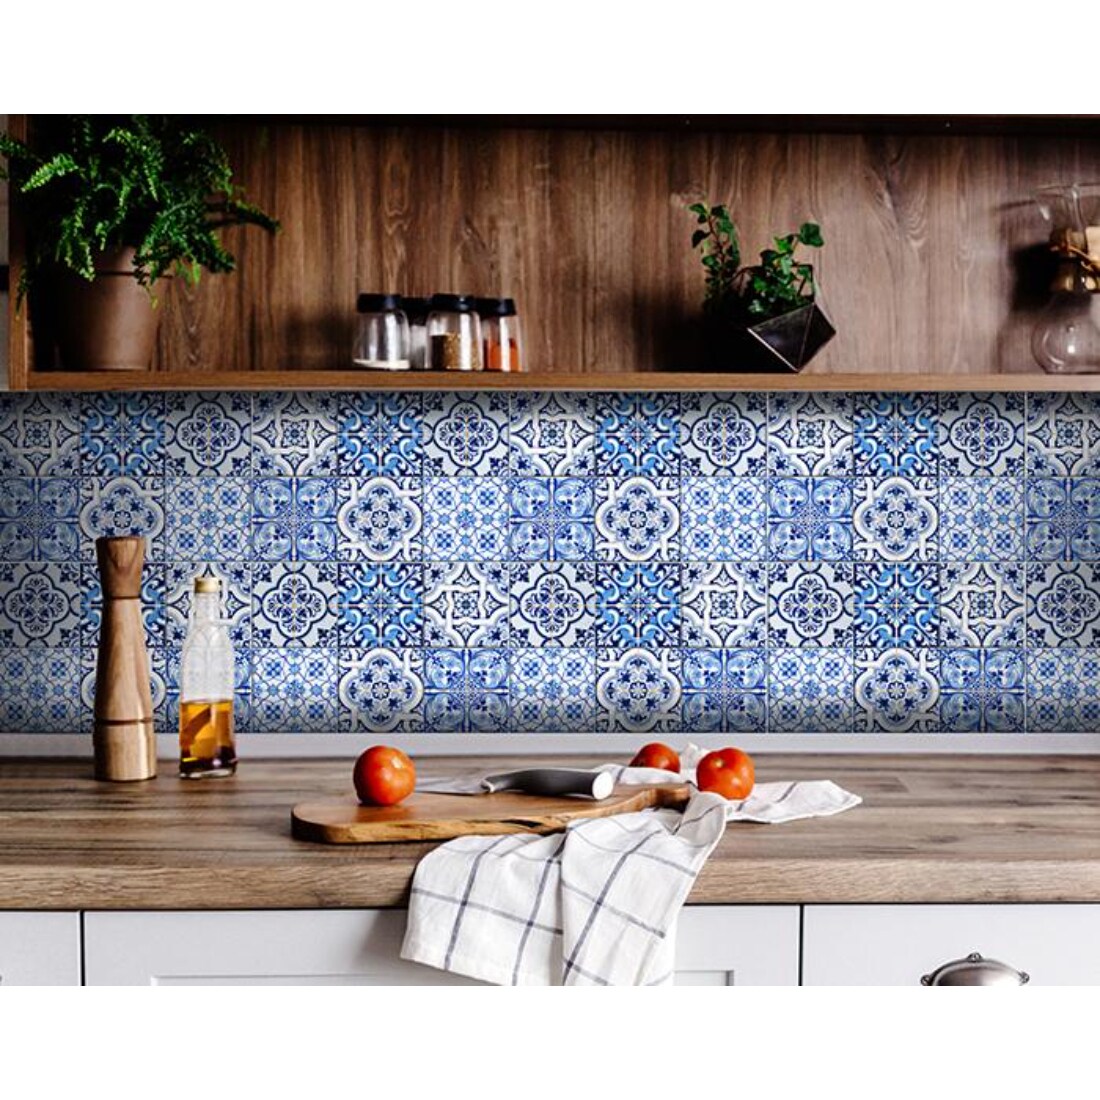 5 Inch Wide Wallpaper & Accessories at Lowes.com